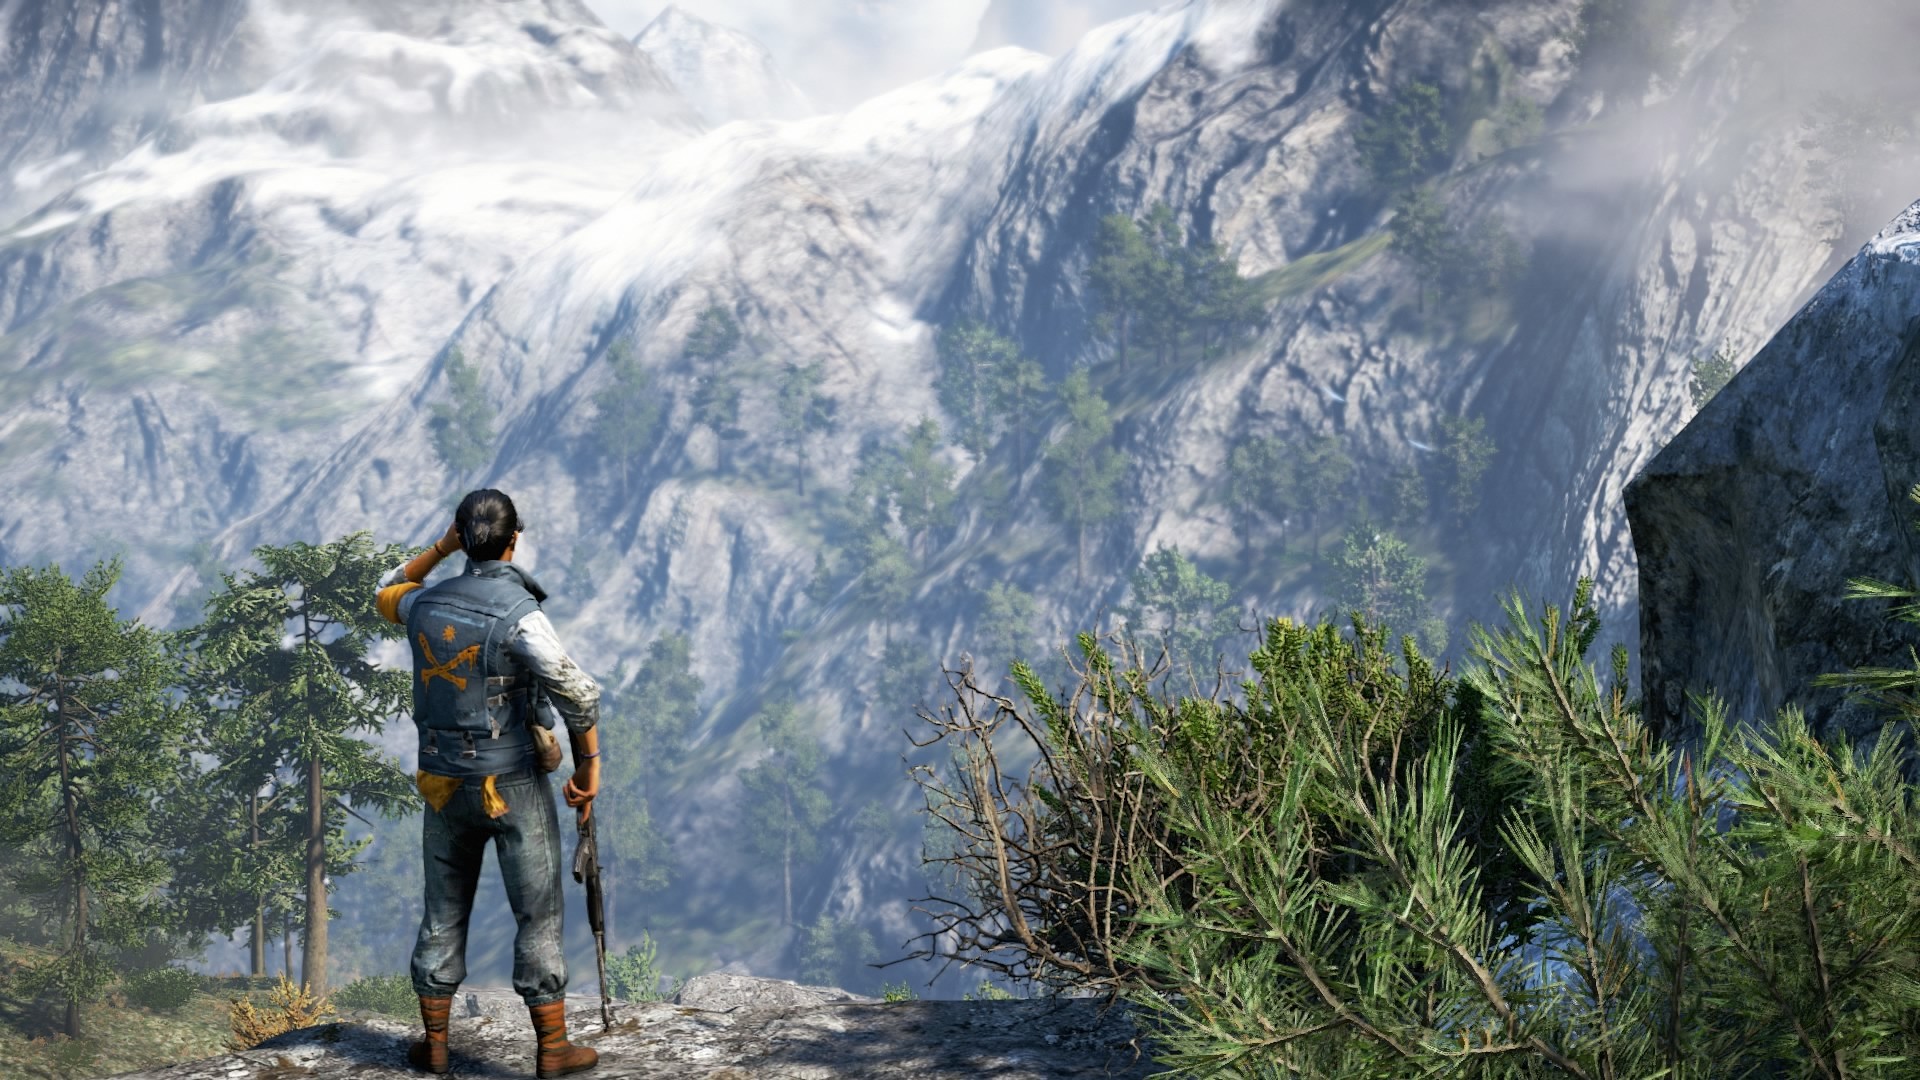 1920x1080 Current desktop wallpaper. Too lazy to post my MacBook's one. Screenshot I  took from Far Cry 4 though.